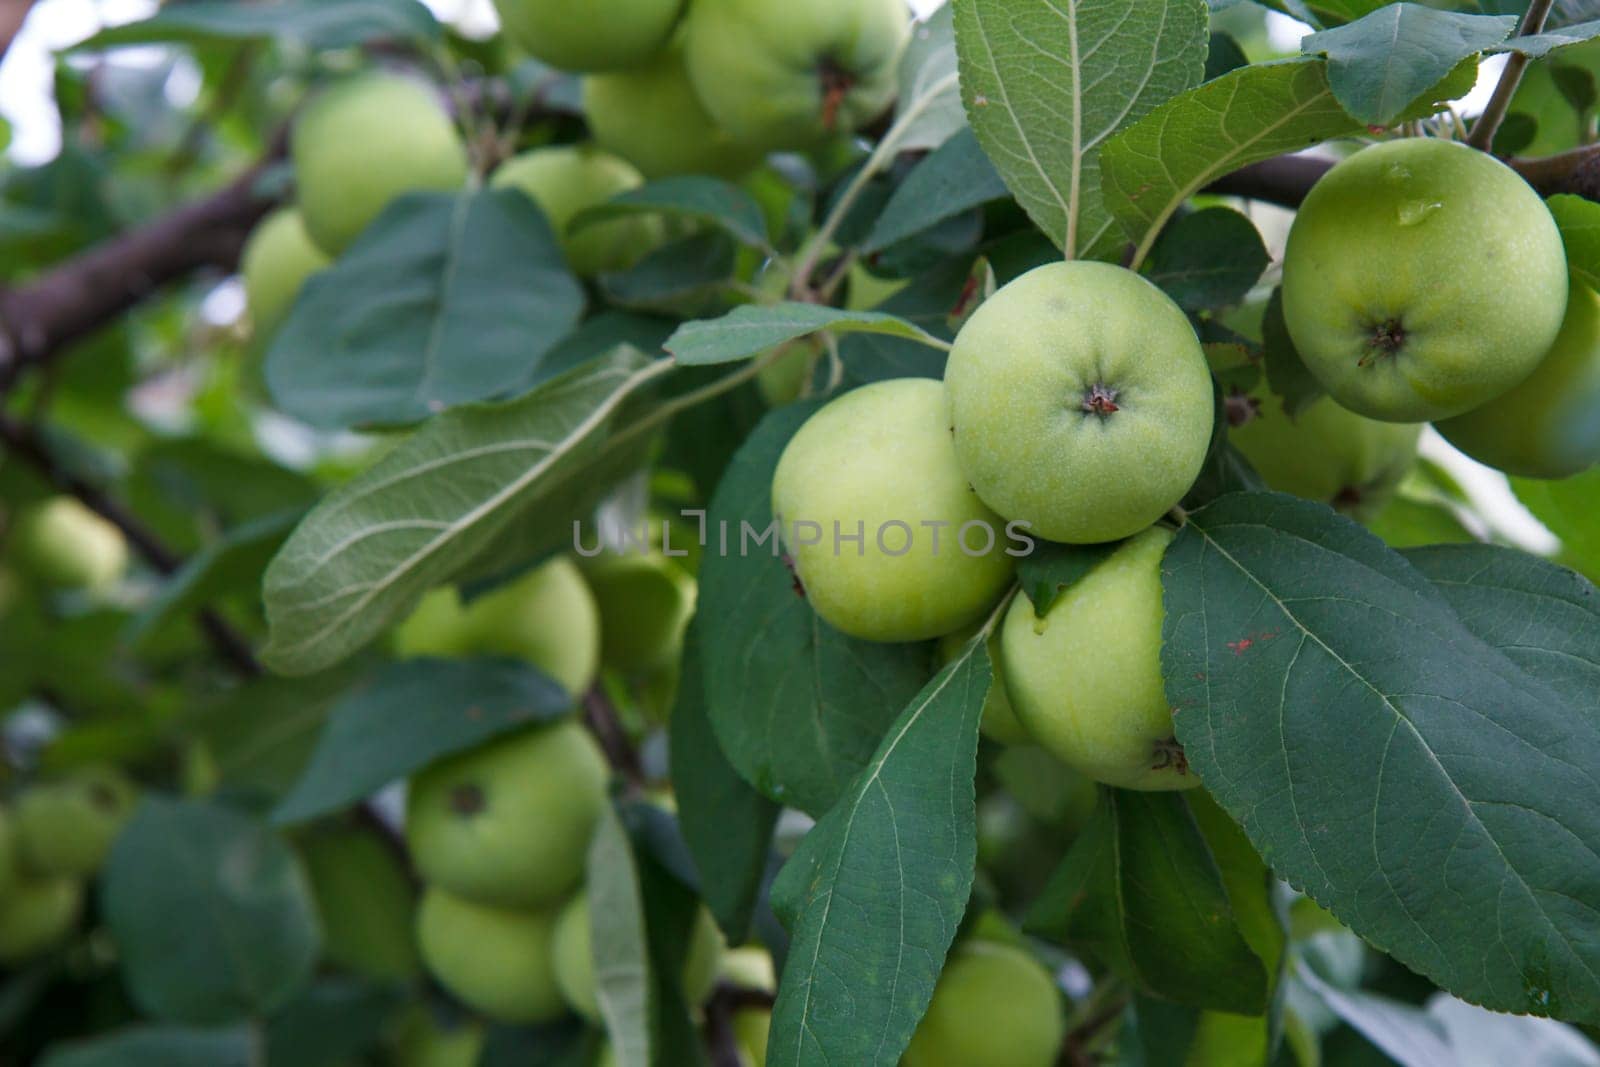 Branch of green apples on a tree in a garden. by mvg6894